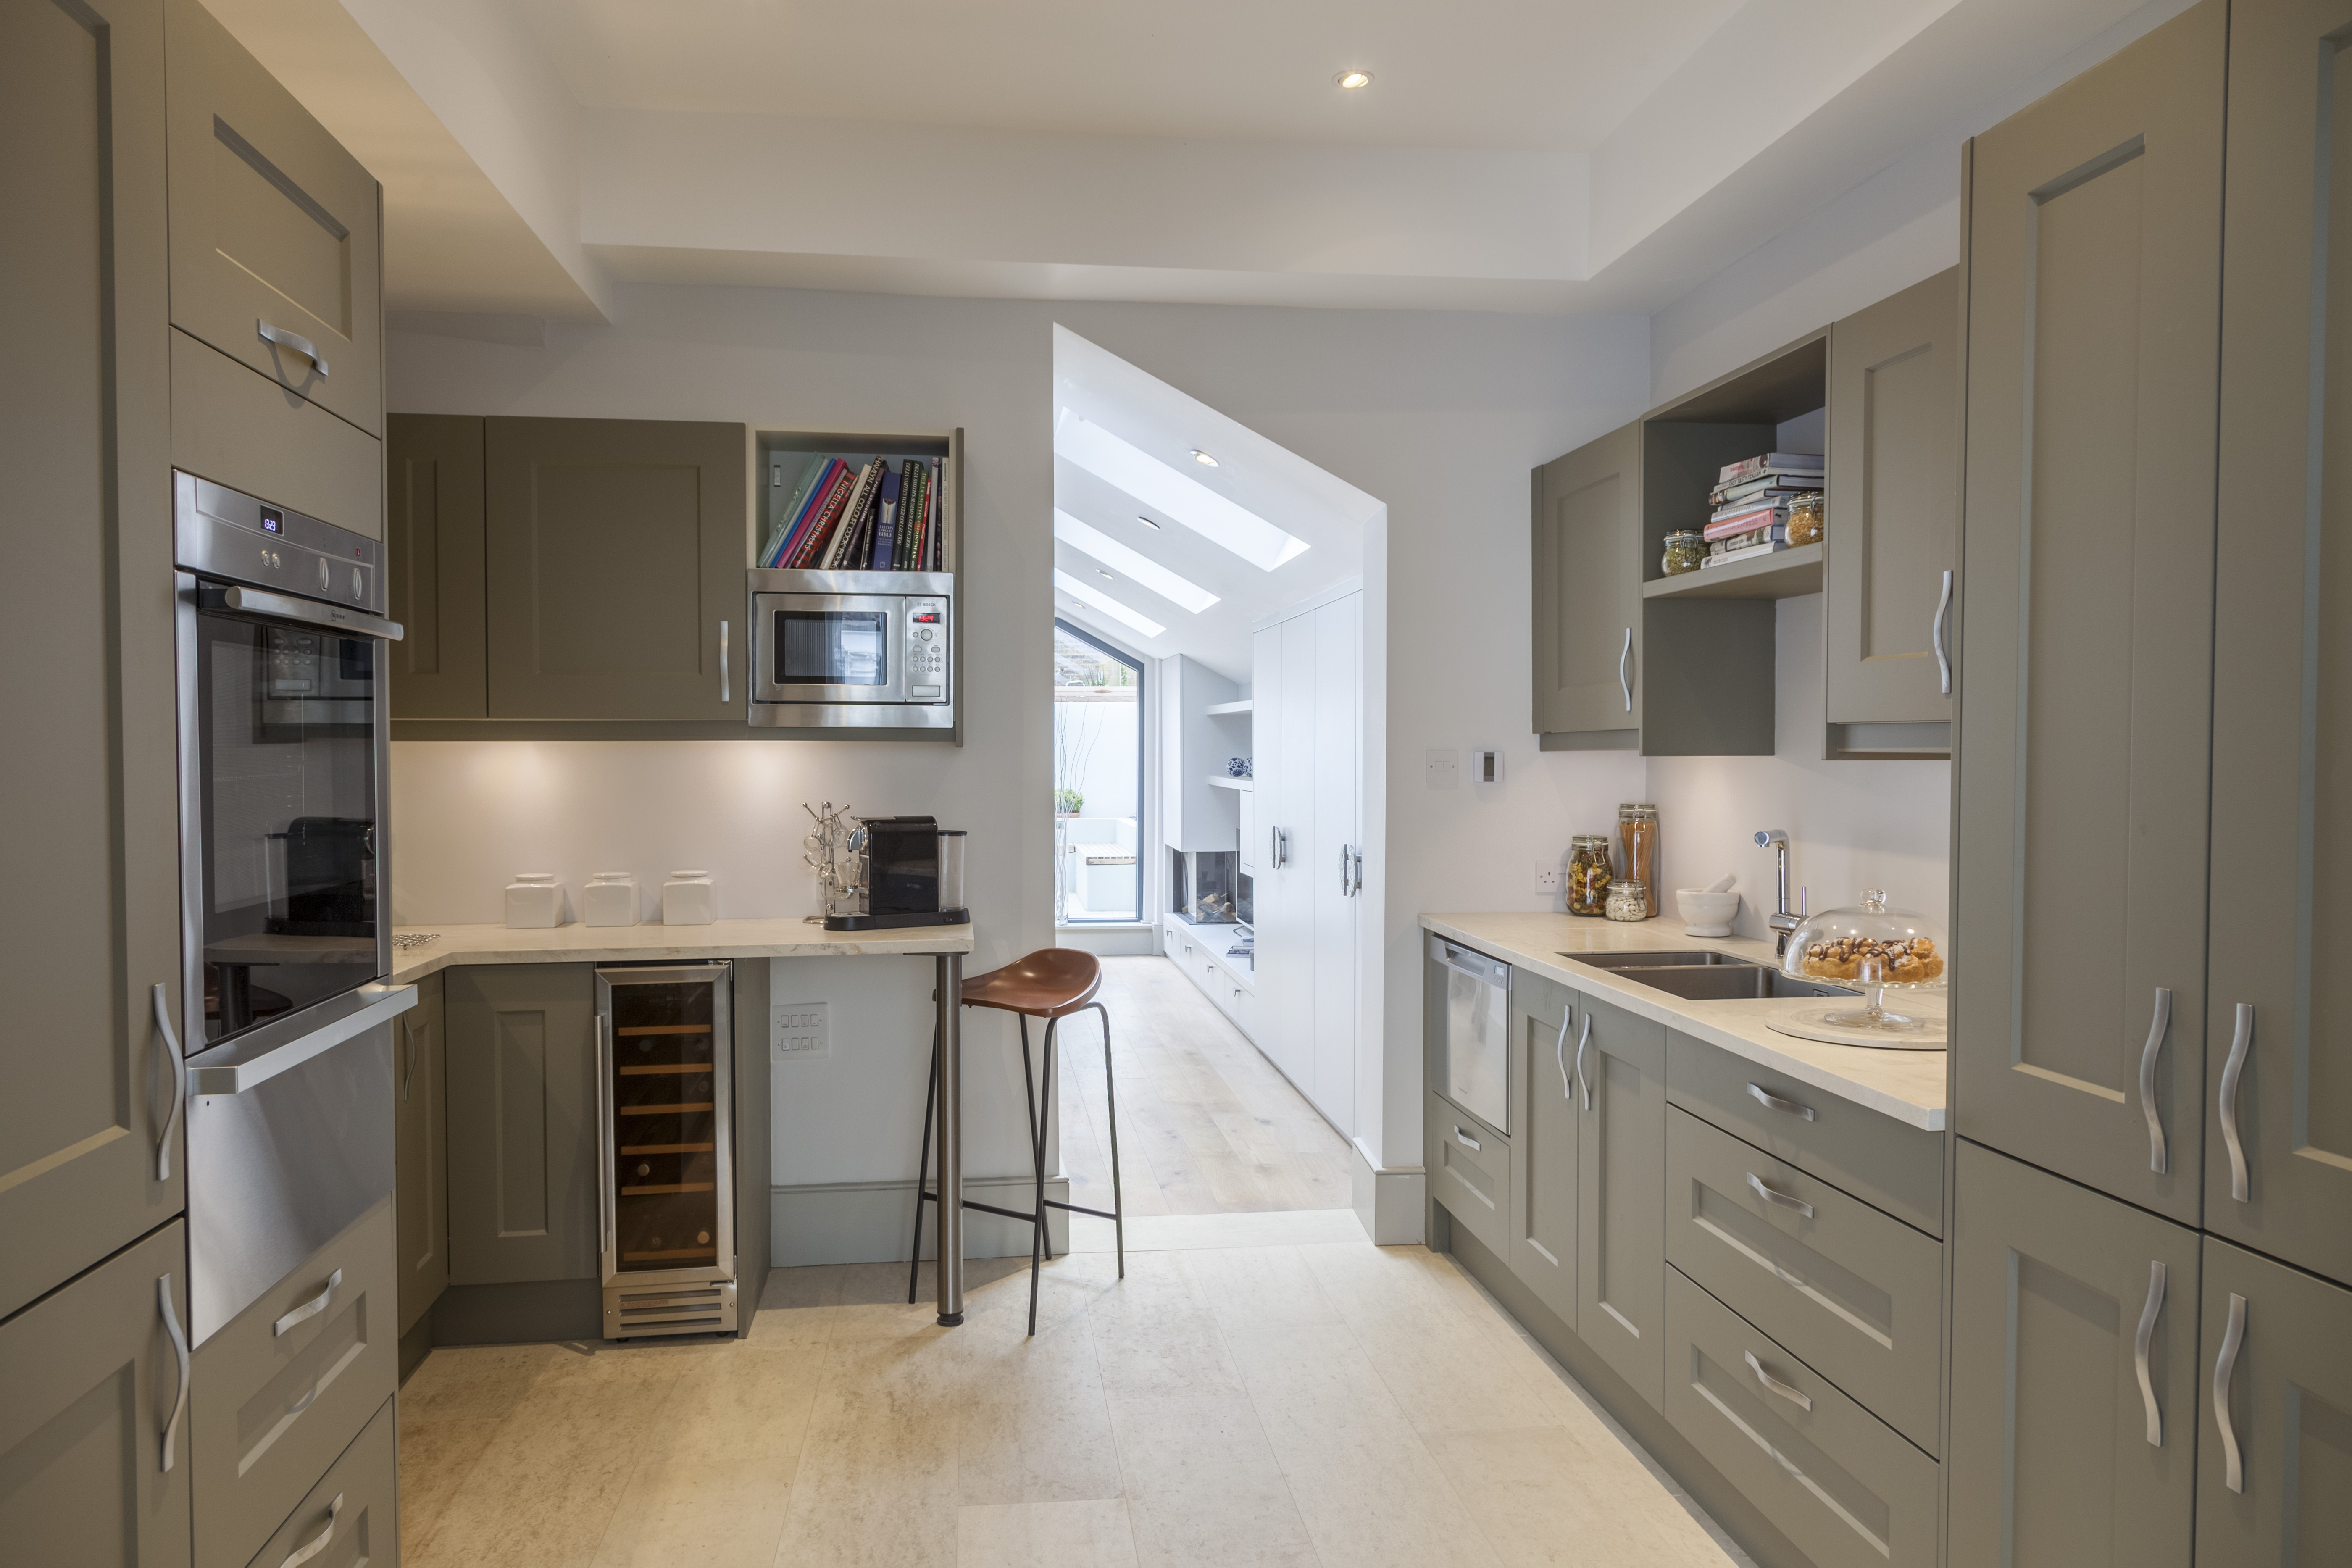 </p> <p>Find your ideal home design pro on designfor-me.com - get matched and see who's interested in your home project. Click image to see more inspiration from our design pros</p> <p>Design by Rowena, interior designer from Hammersmith and Fulham, London</p> <p> #interiordesign #interiors #homedecor #homeinspiration #kitchens #kitchendesign #kitcheninspiration #kitchenideas #kitchengoals </p> <p>